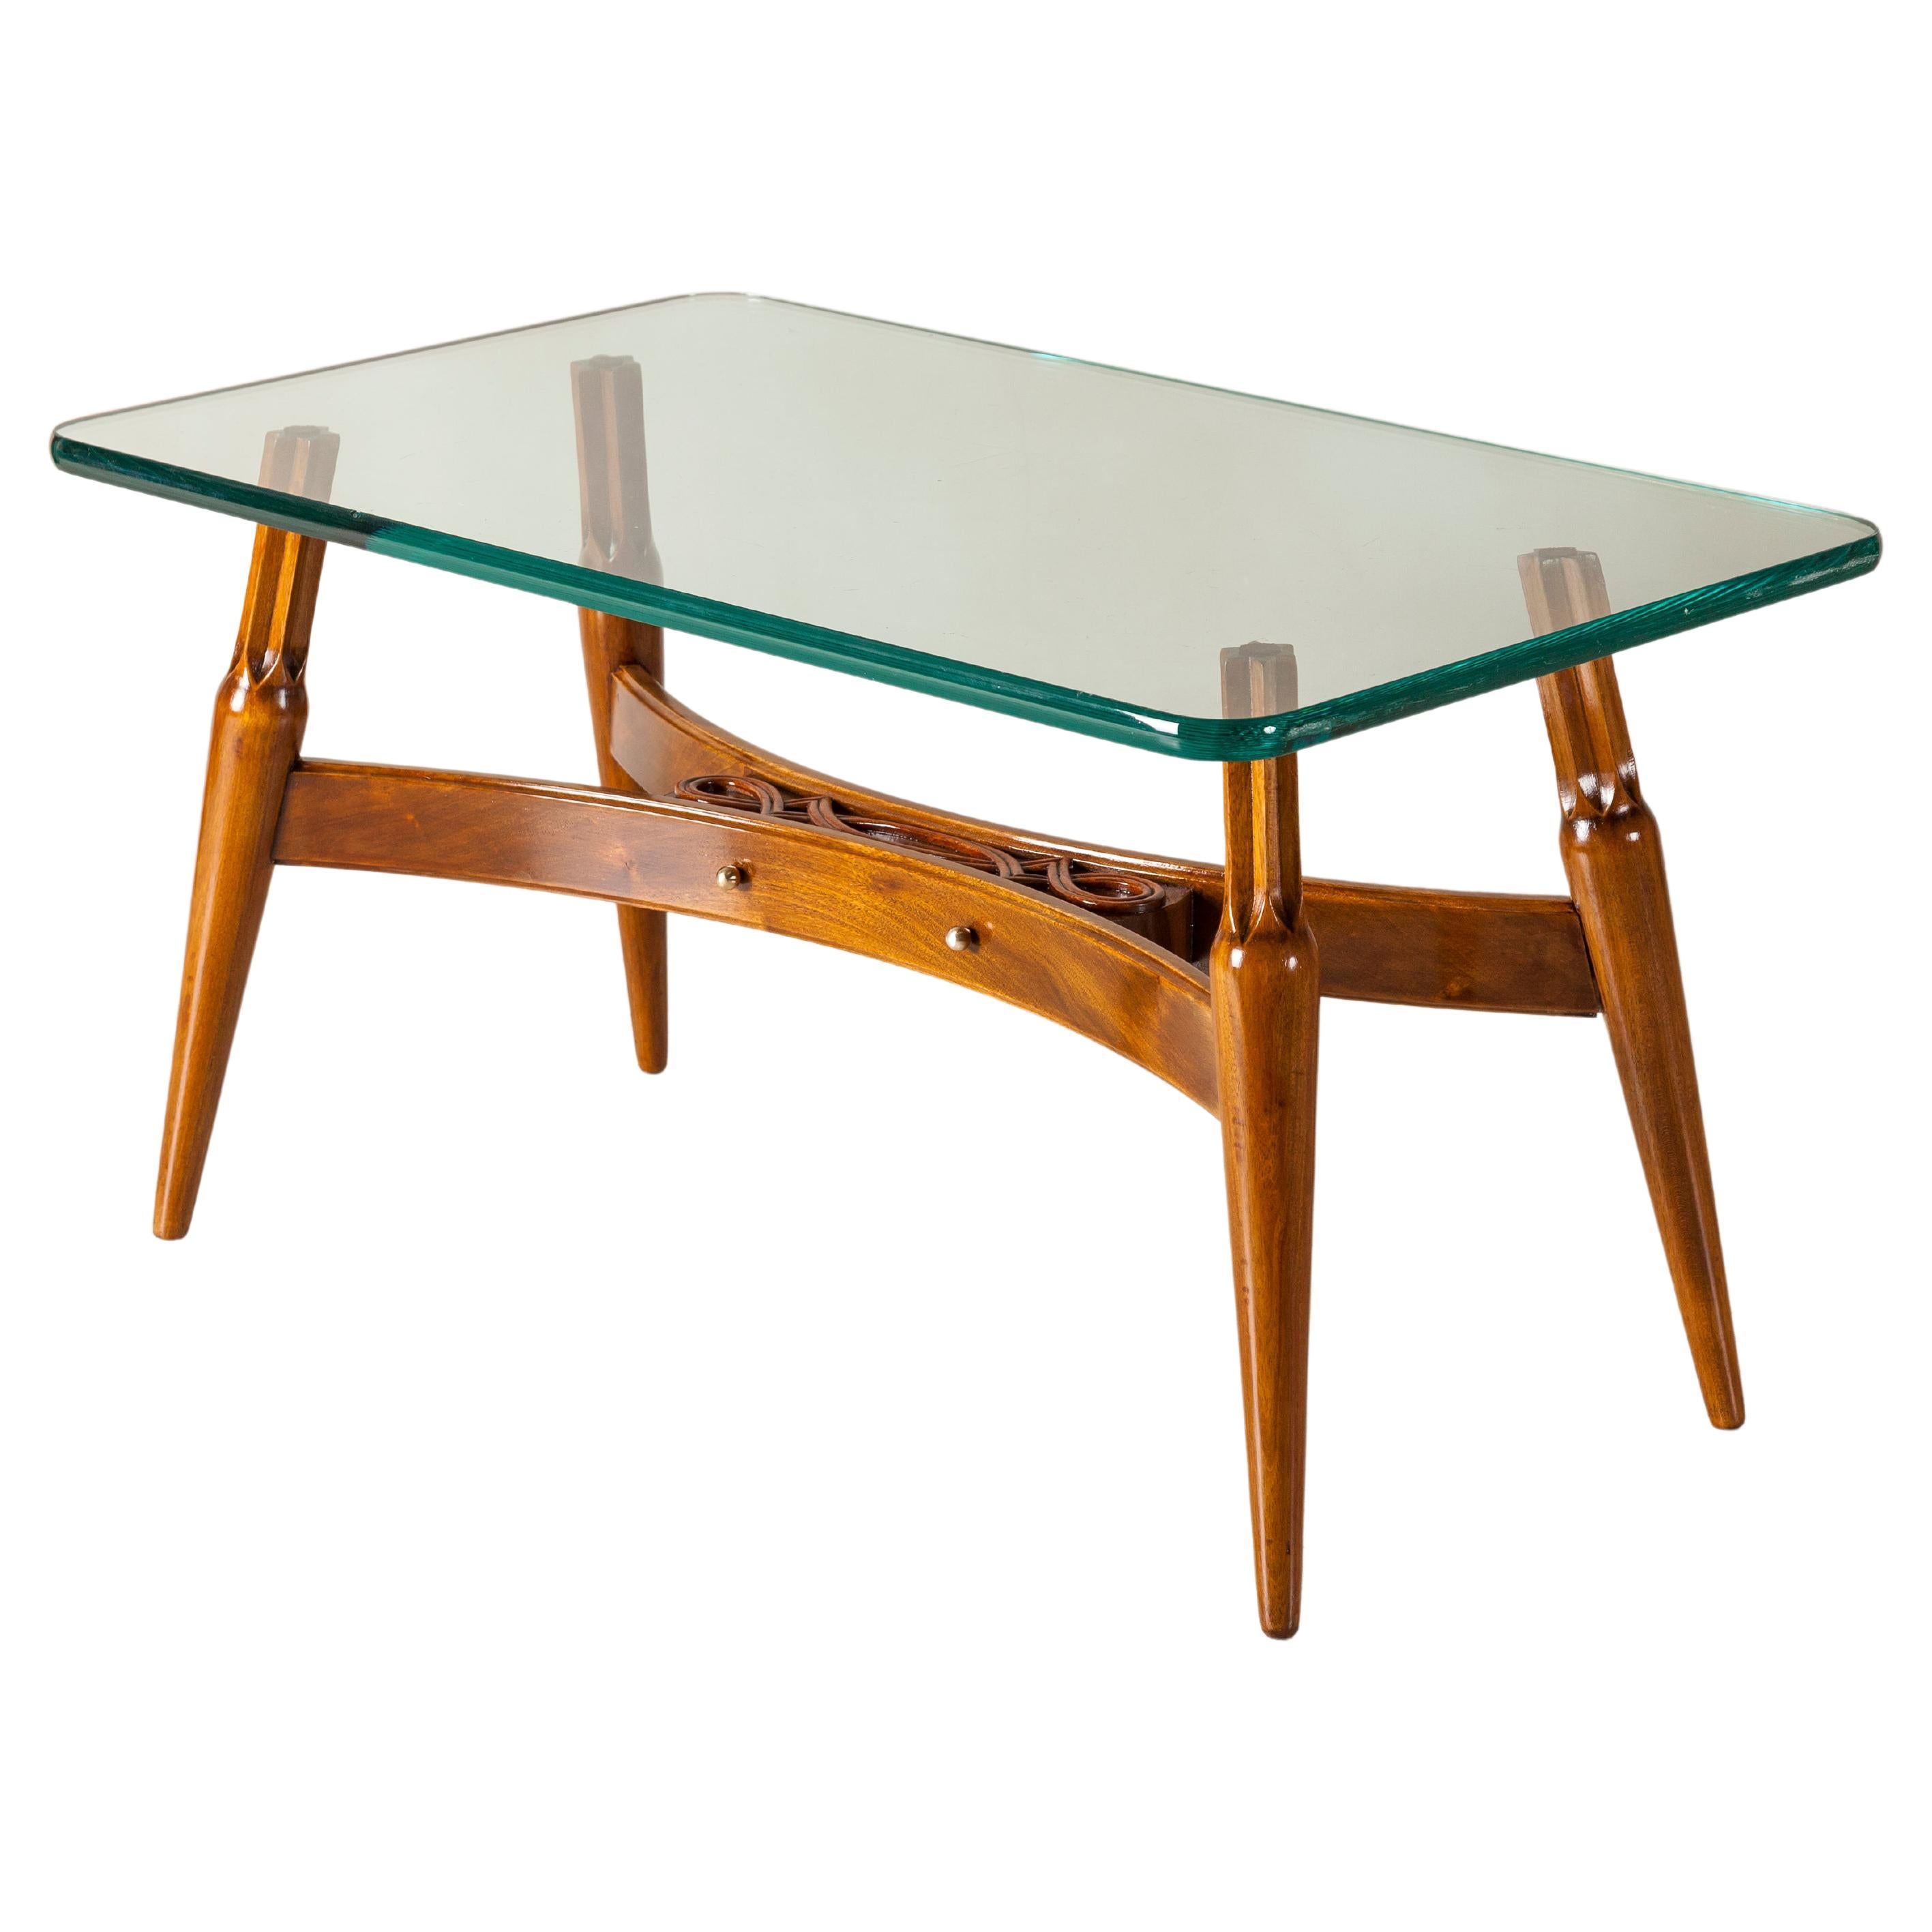 Wood and Glass Low Table by Englander & Bonta, Argentina, circa 1950